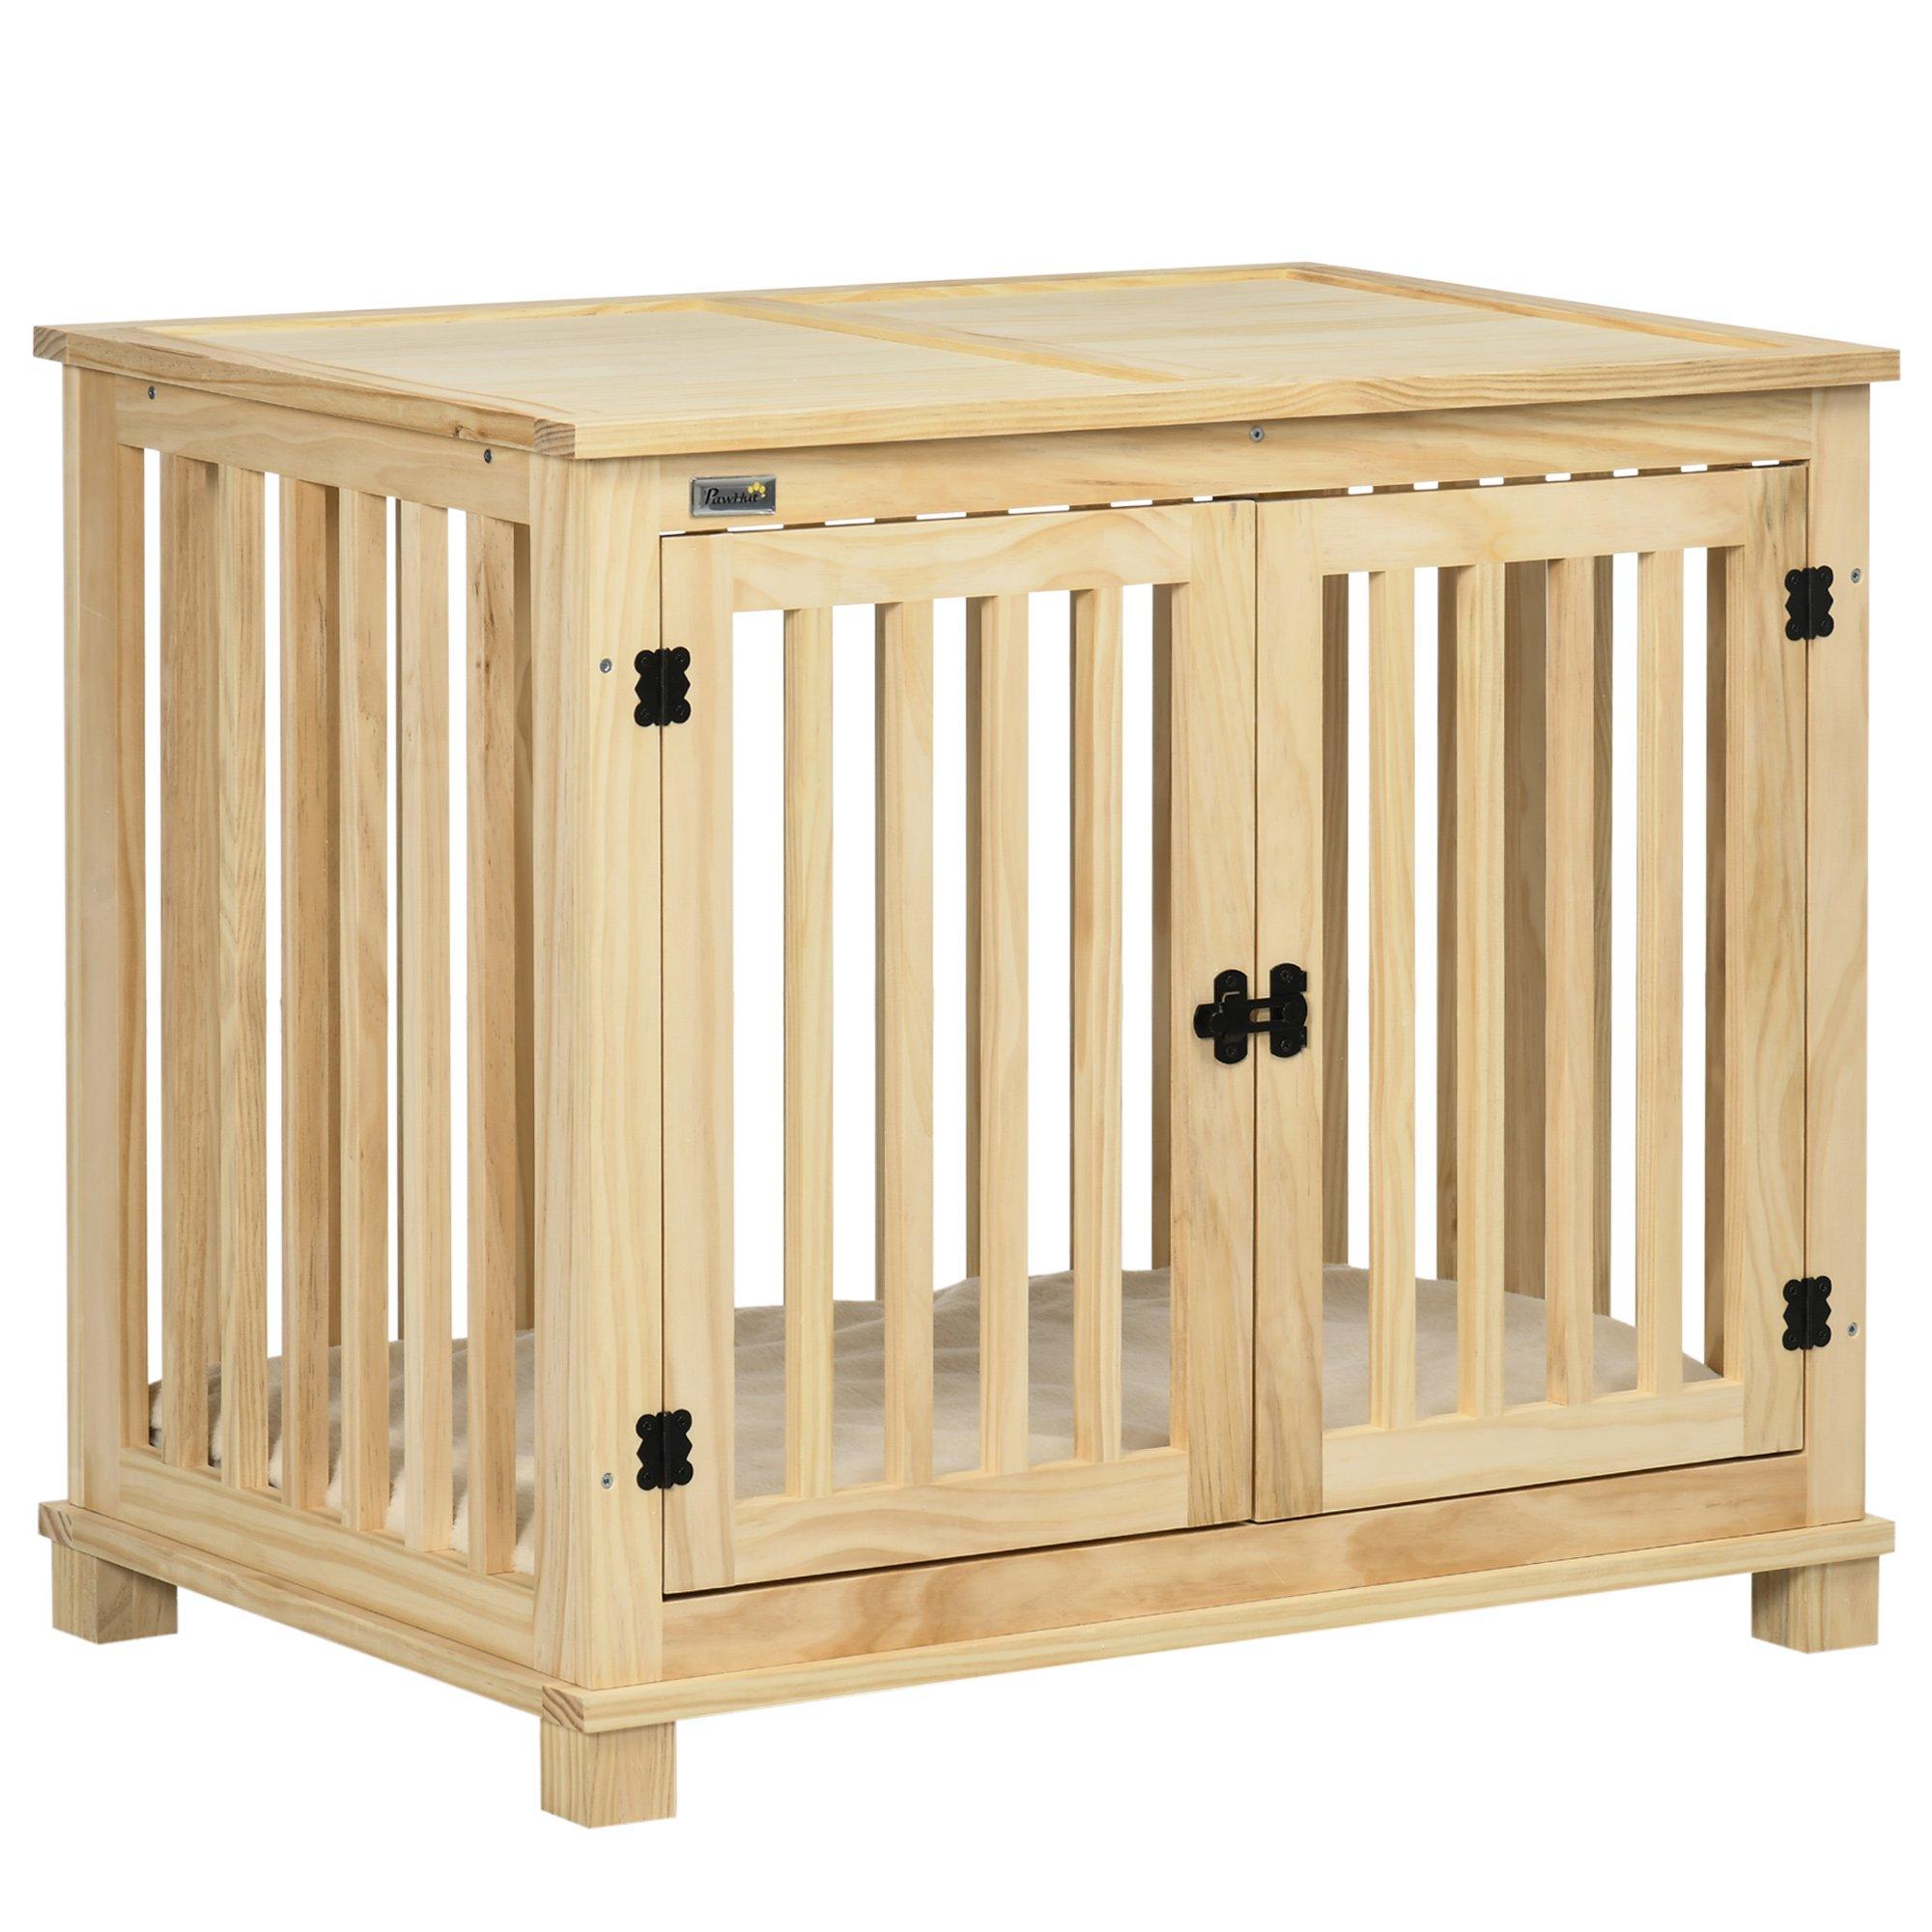 Wooden Dog Crate Furniture with Double Doors, Soft Cushion